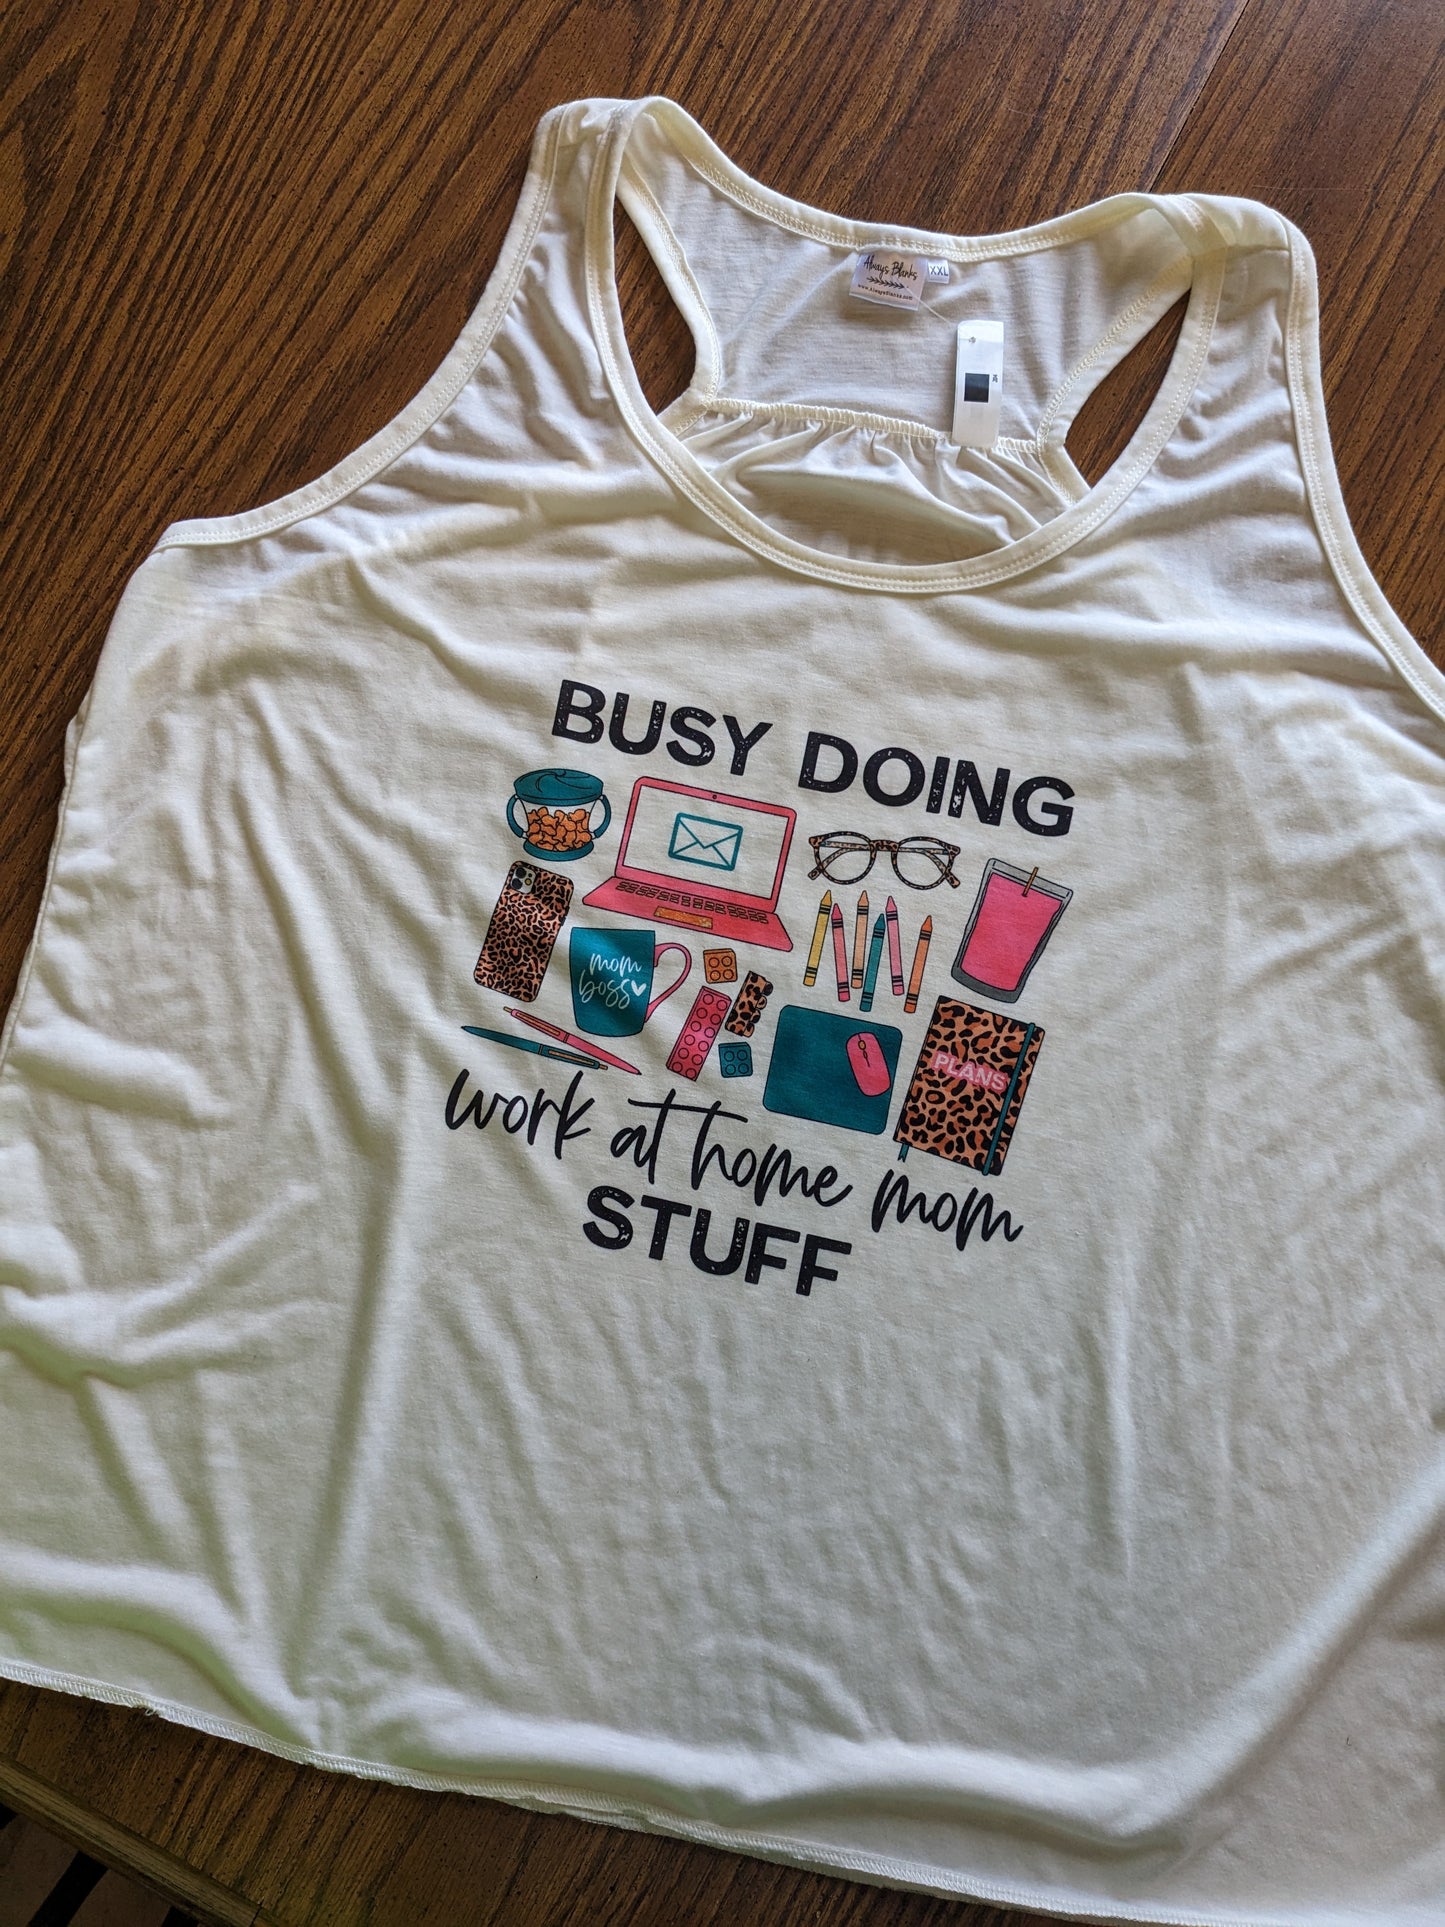 Doing Work at Home Mom Stuff Tank top